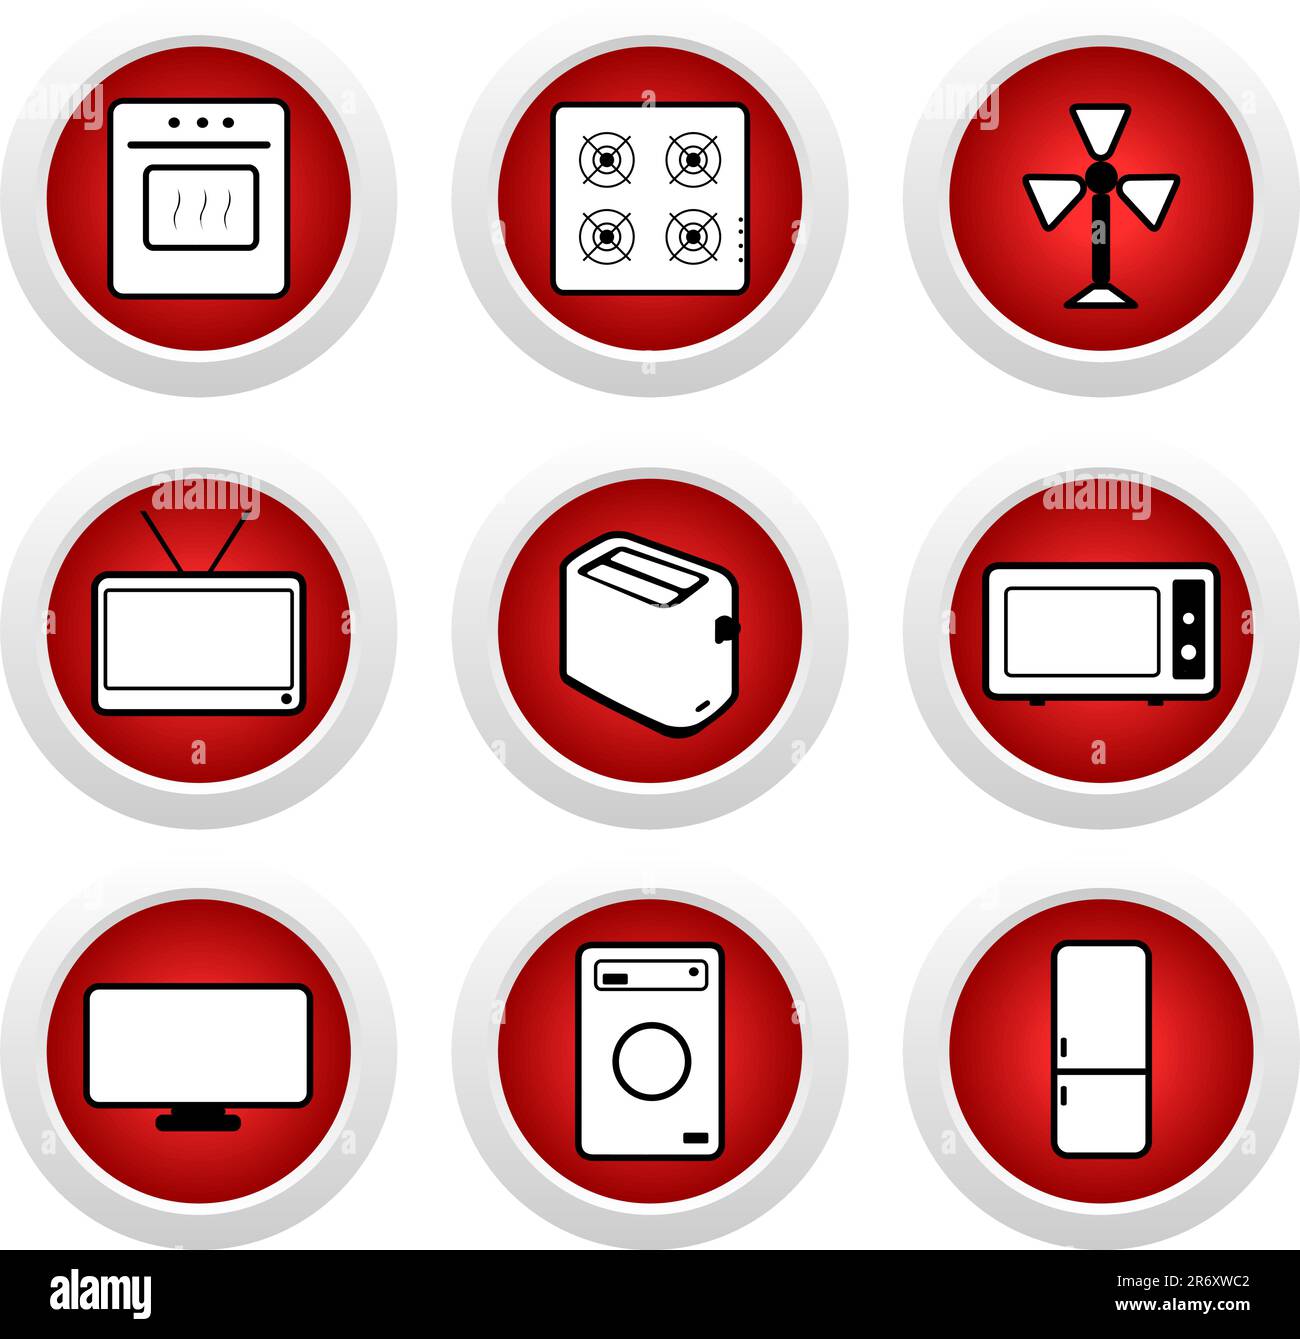 Red buttons with icon 9. Vector Stock Vector